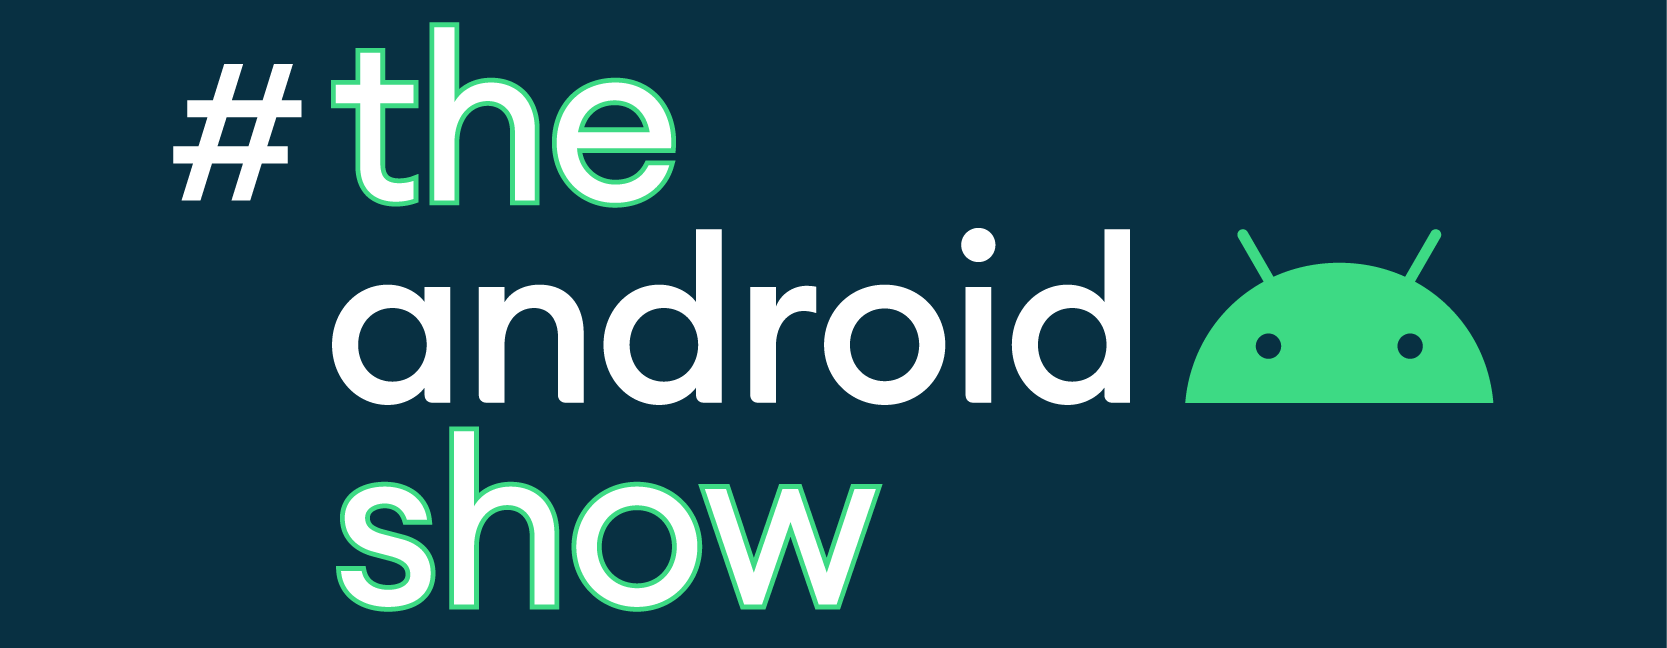 Android Show ロゴ